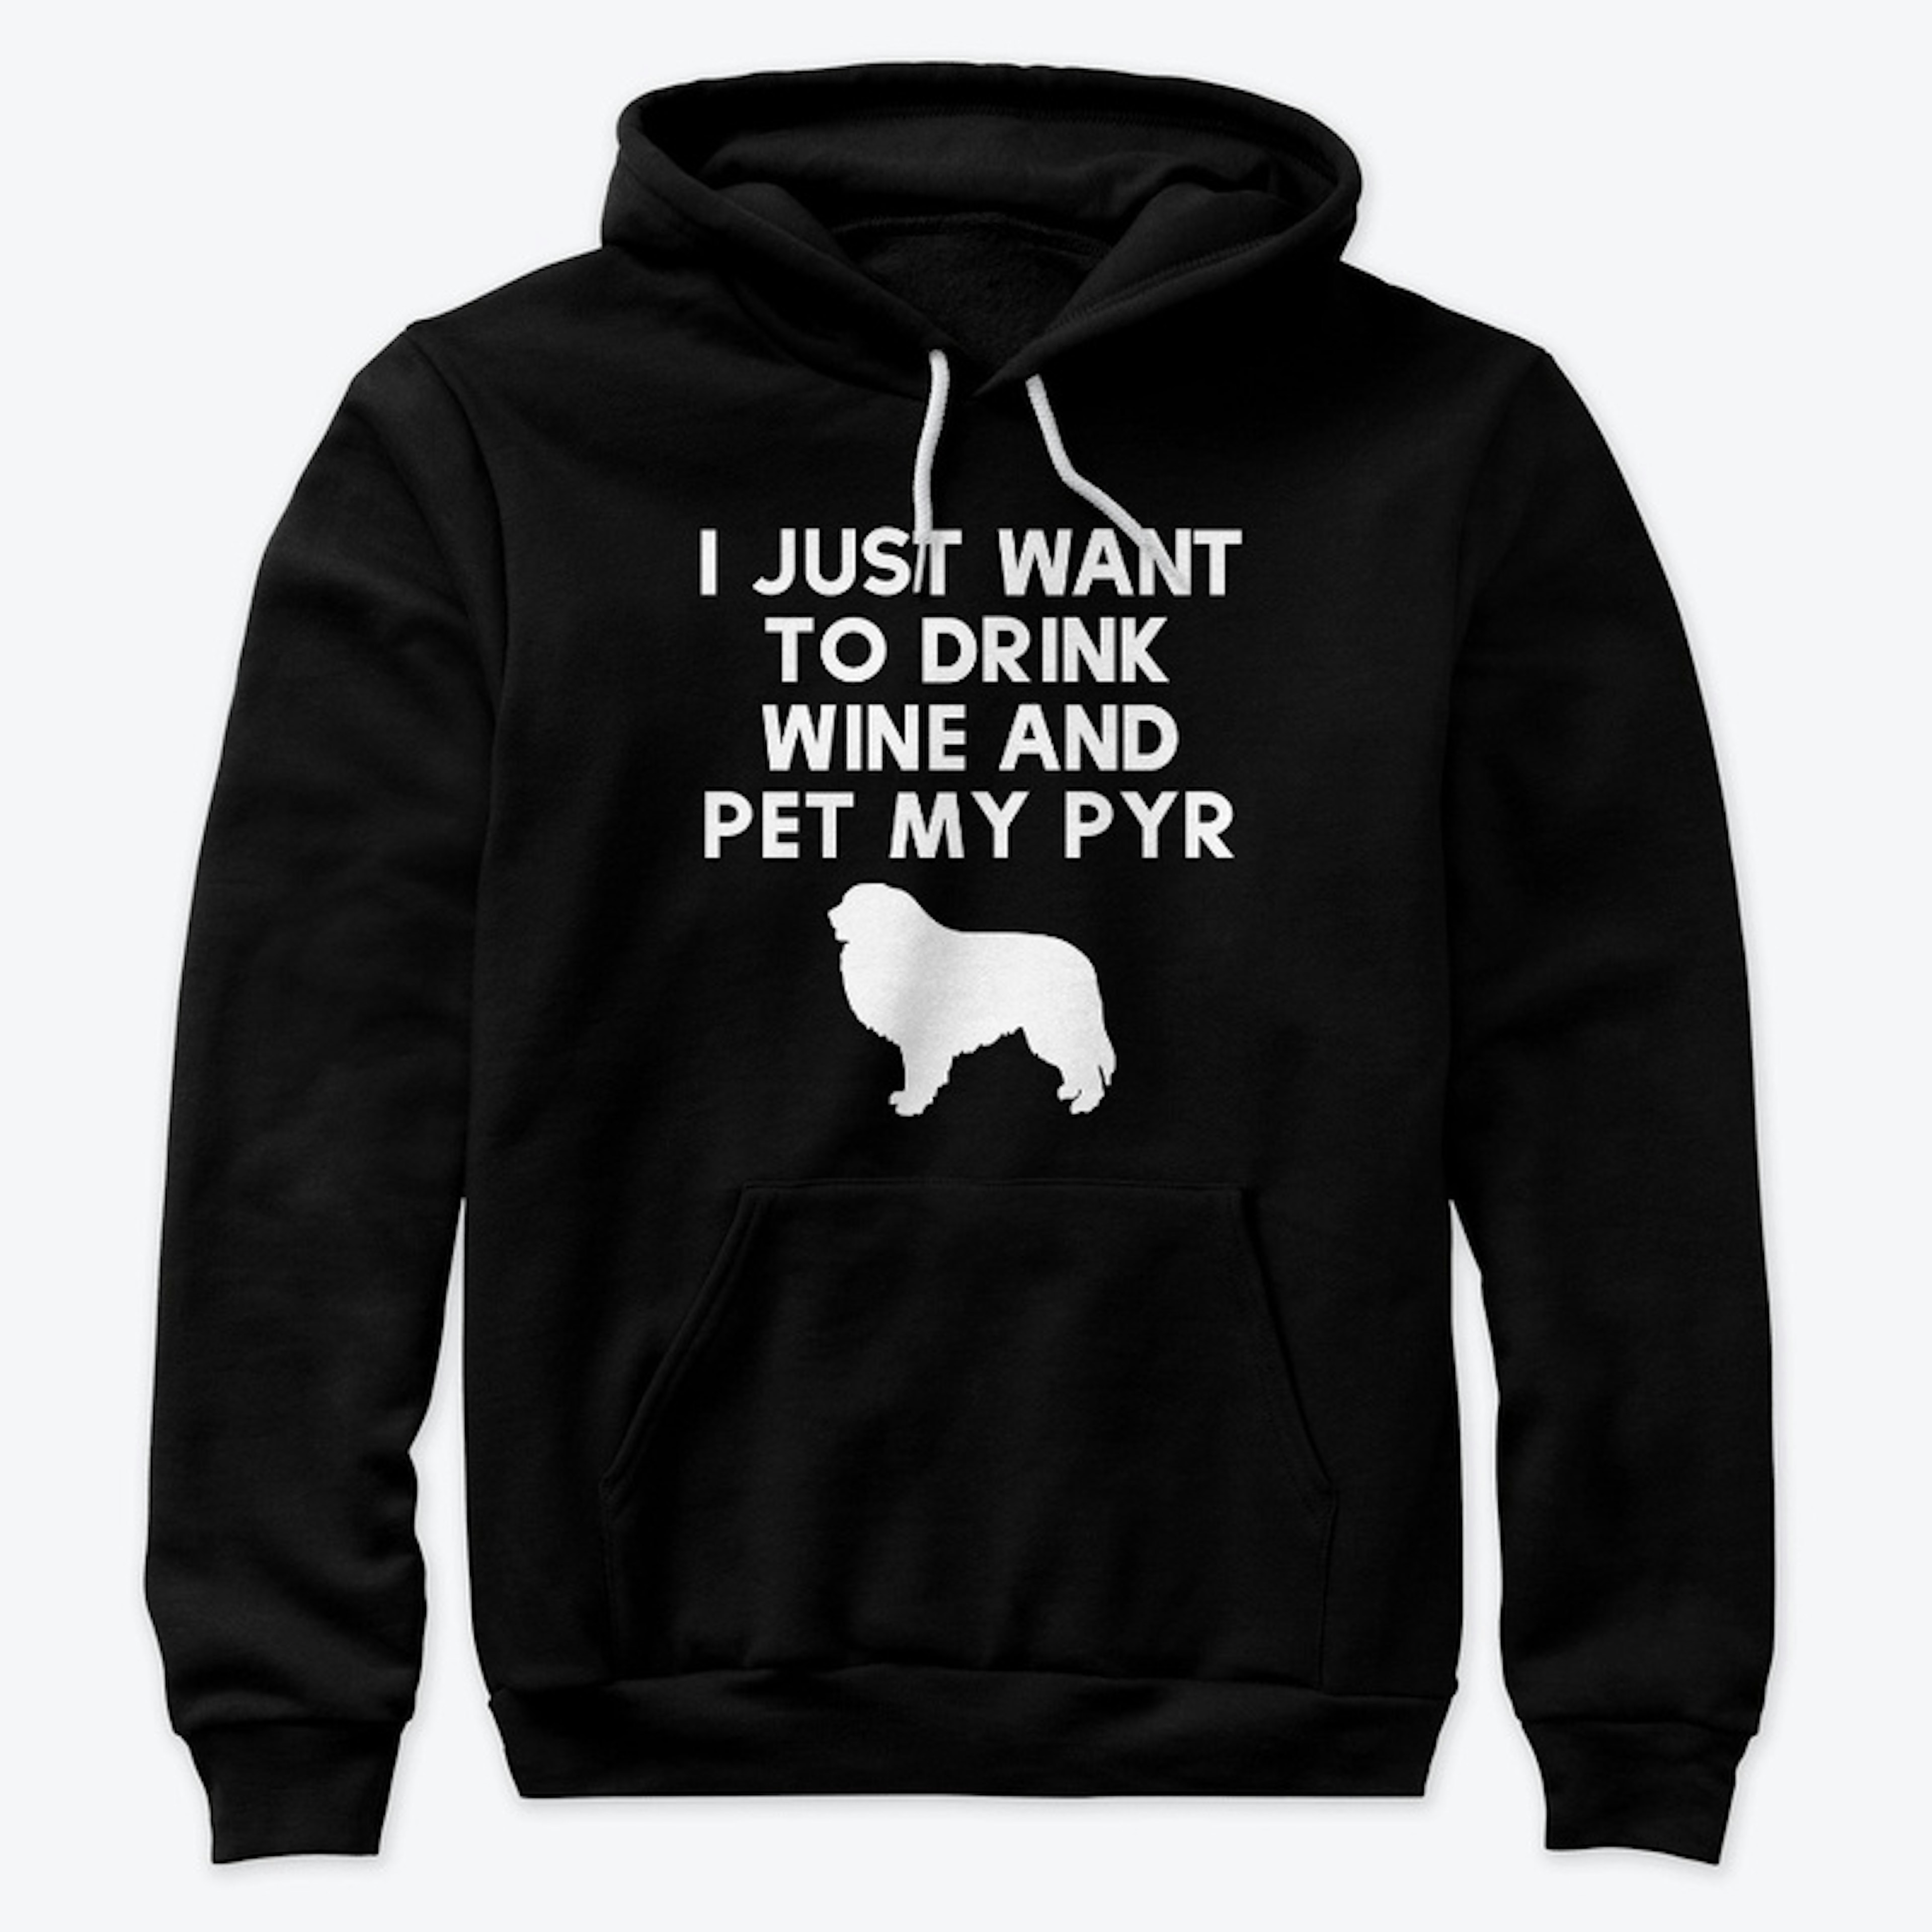 Drink Wine and Pet My Pyr Tee